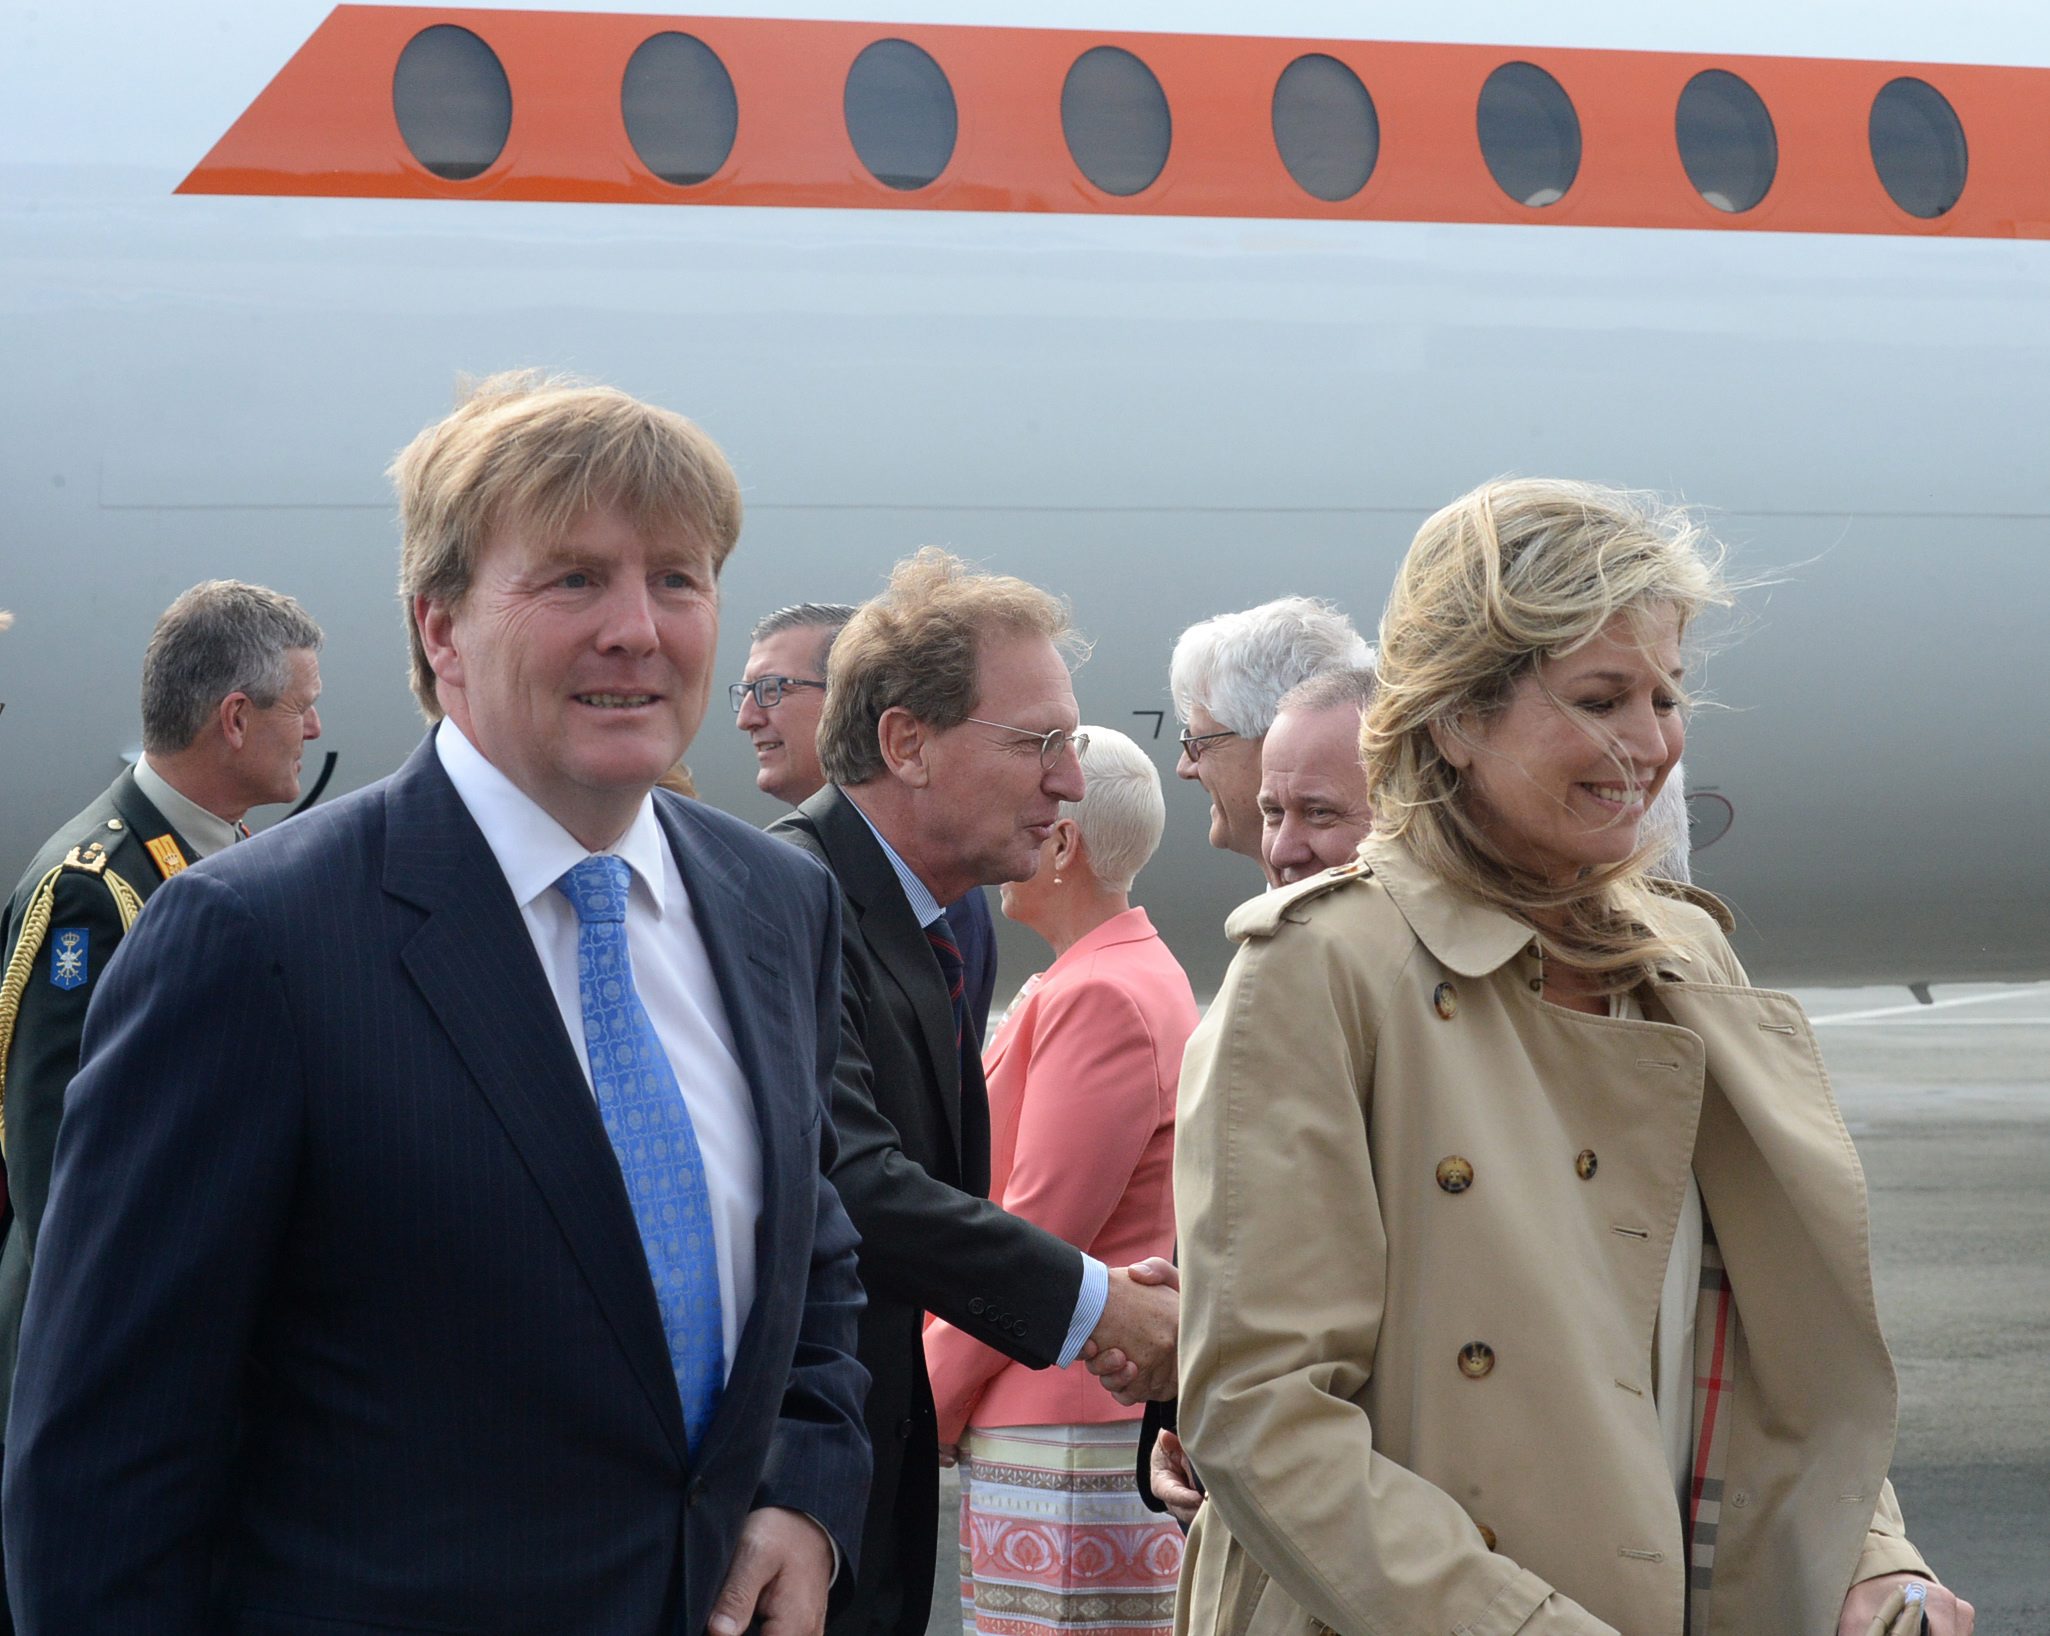 King Willem-Alexander and Queen Maxima, of the Netherlands, arrive at St. John's International Airport, Tuesday, May 26, 2015, in St John's, Newfoundland. (Joe Gibons/St. John's Telegram via The Canadian Press via AP, Pool)